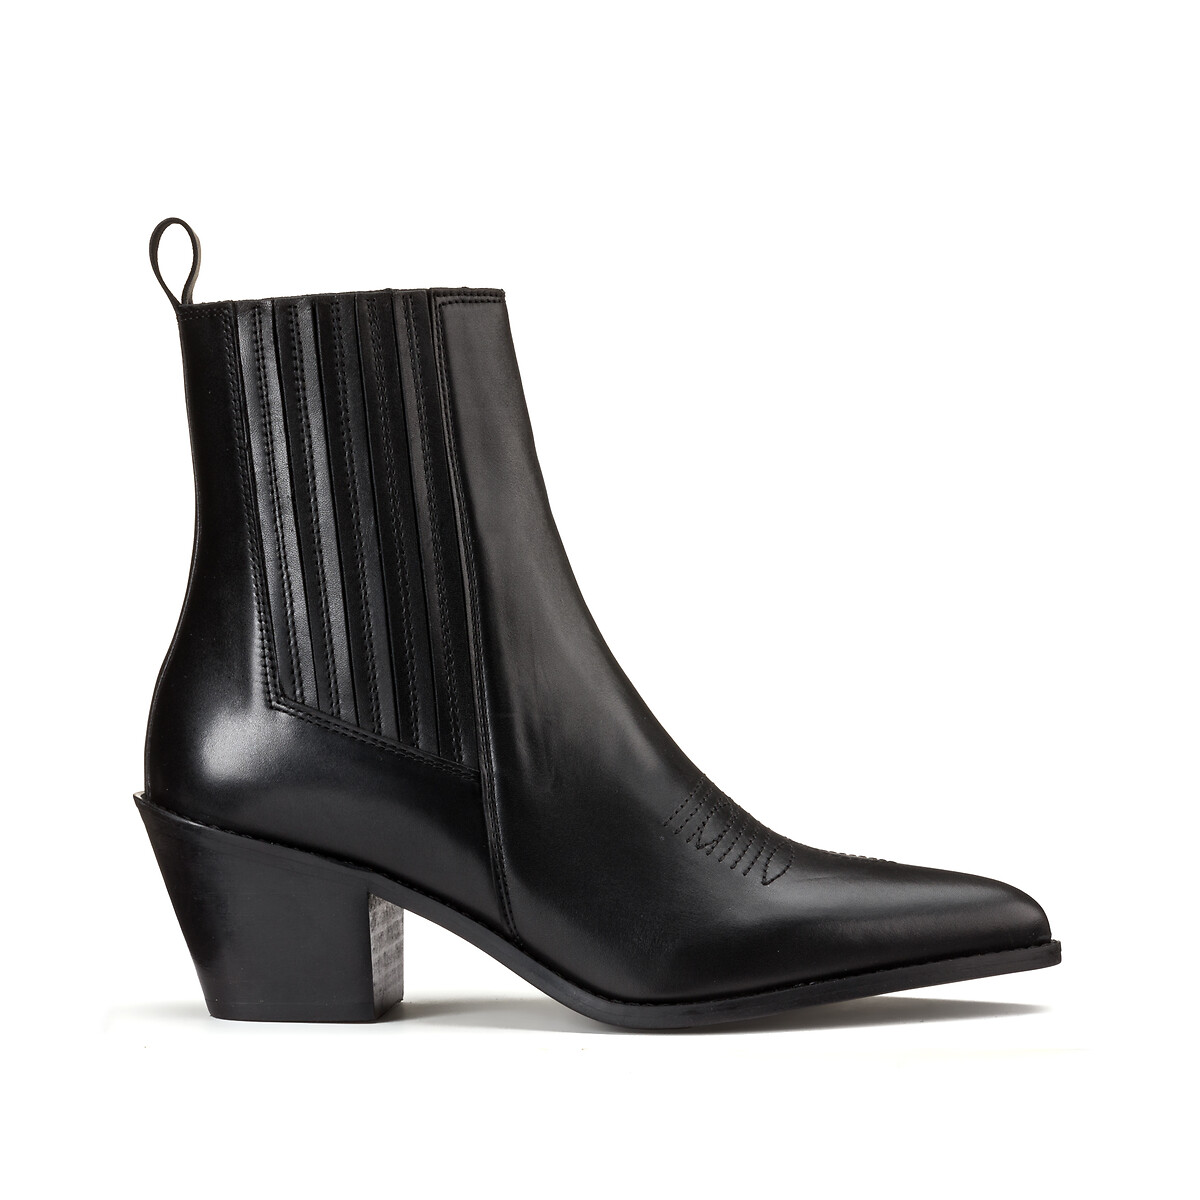 Les signatures - leather cowboy boots with pointed toe, black, La ...